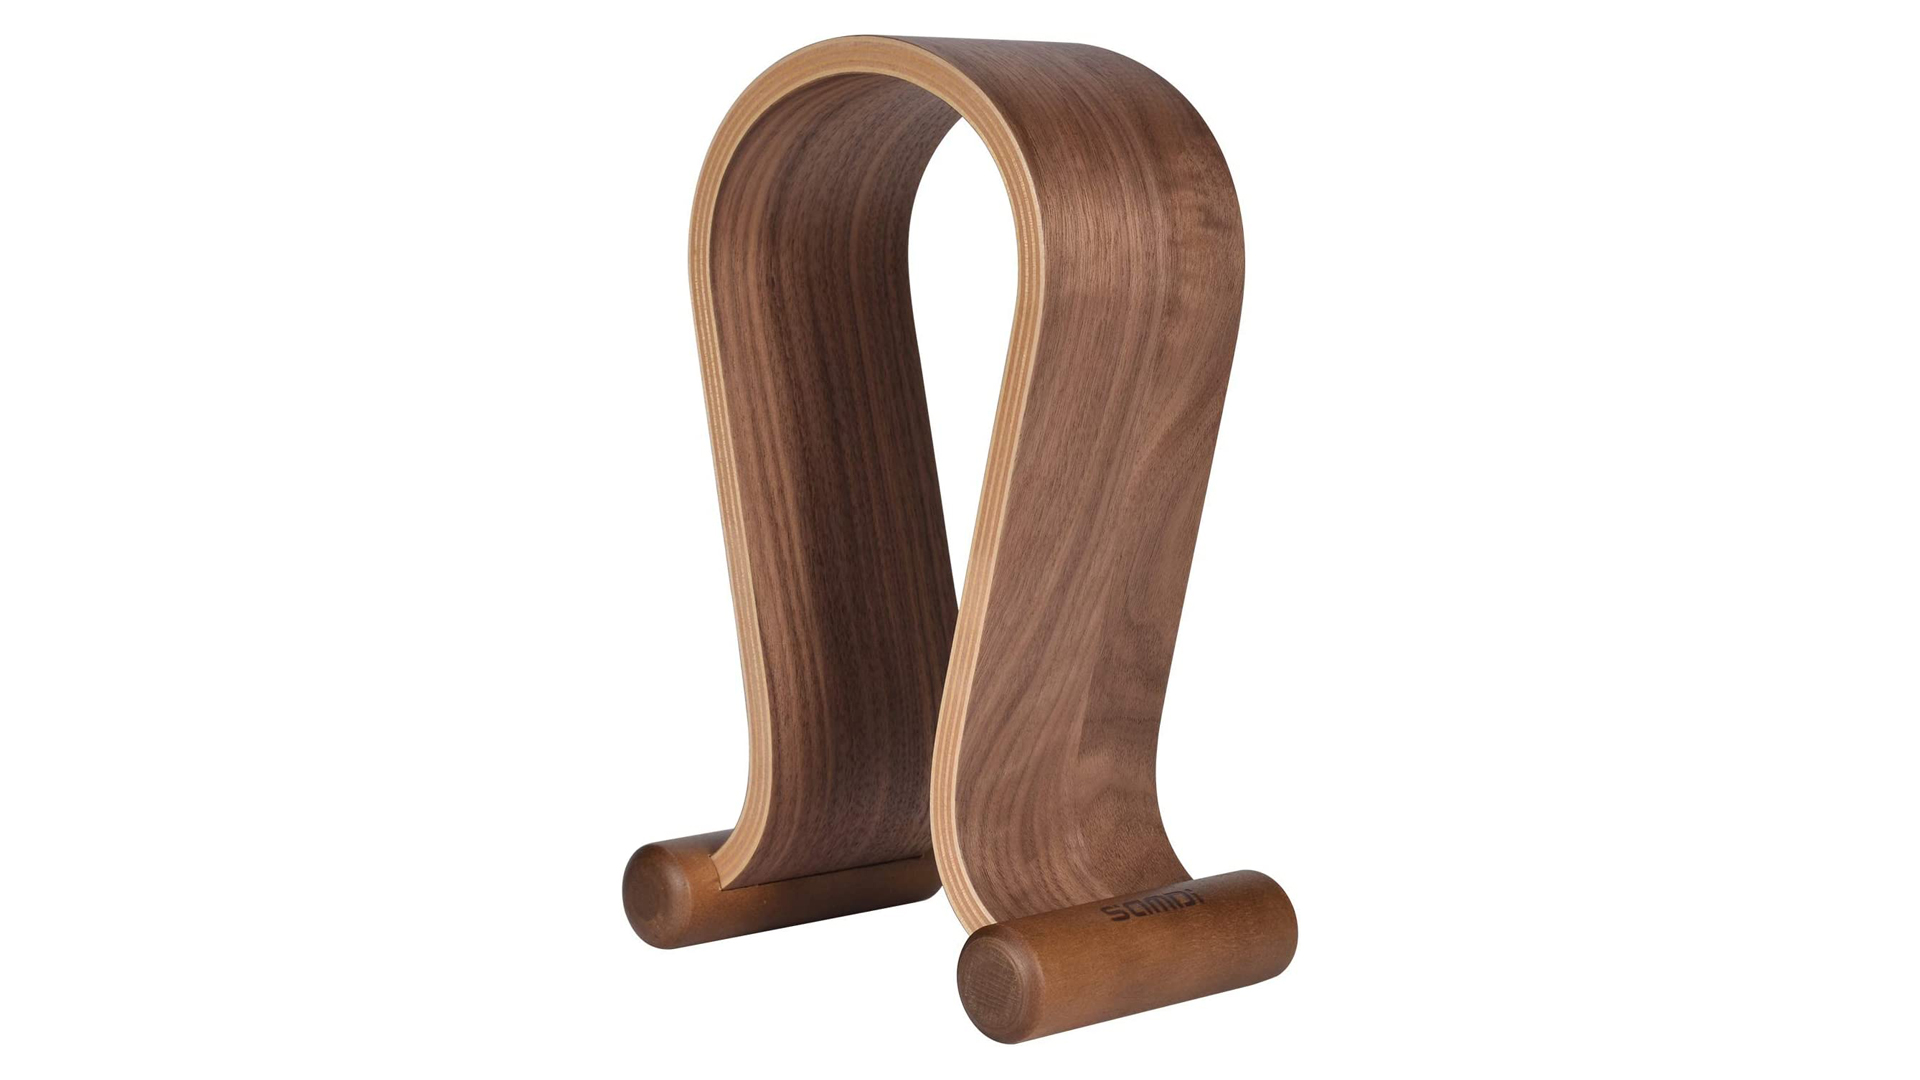 Product image of a SAMDI Wood Gaming Headset Holder on a white background